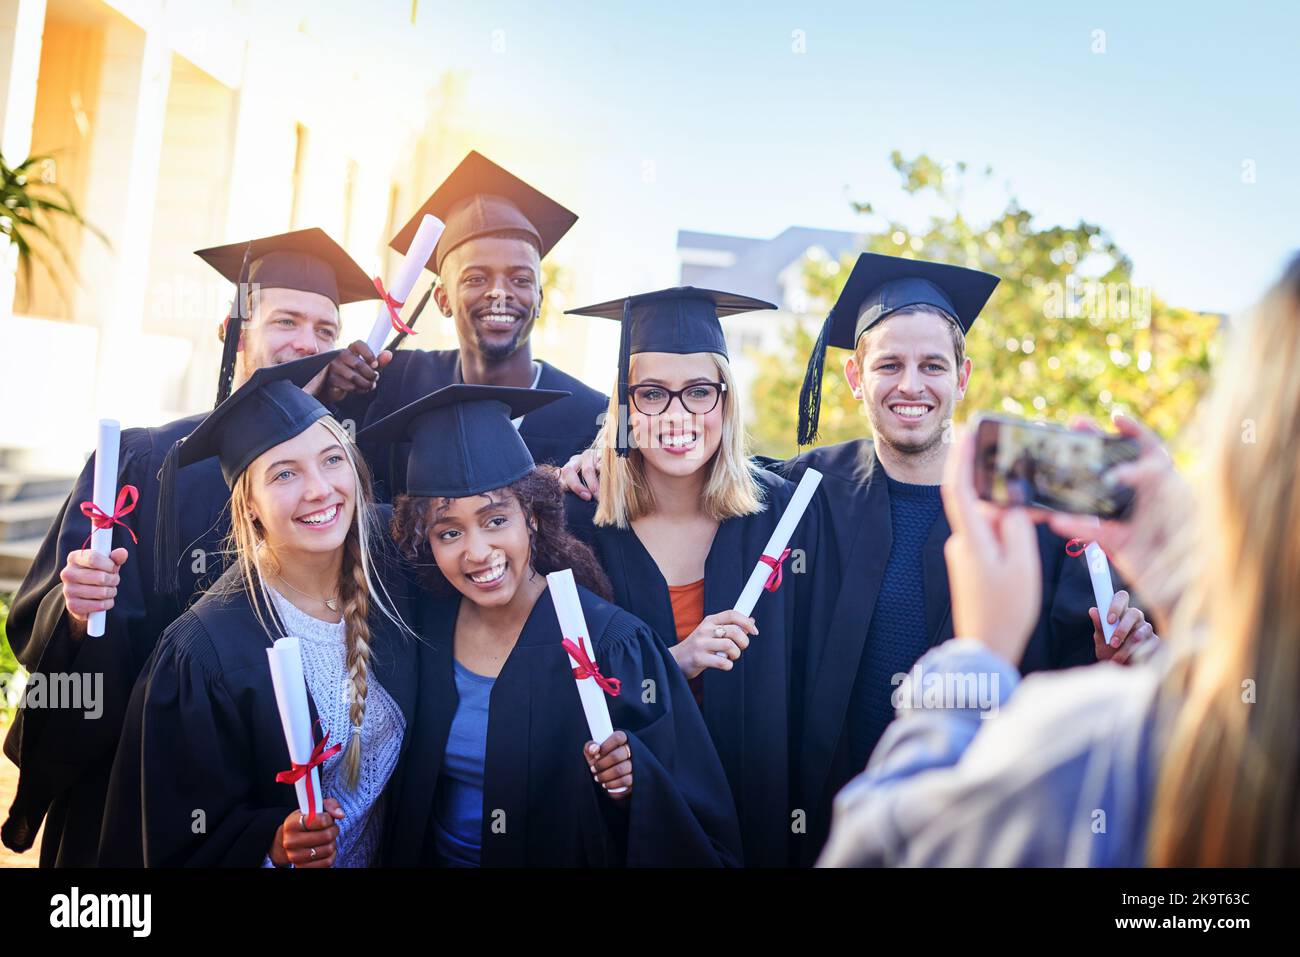 Everyone is a bit snap-happy. students on graduation day from university. Stock Photo